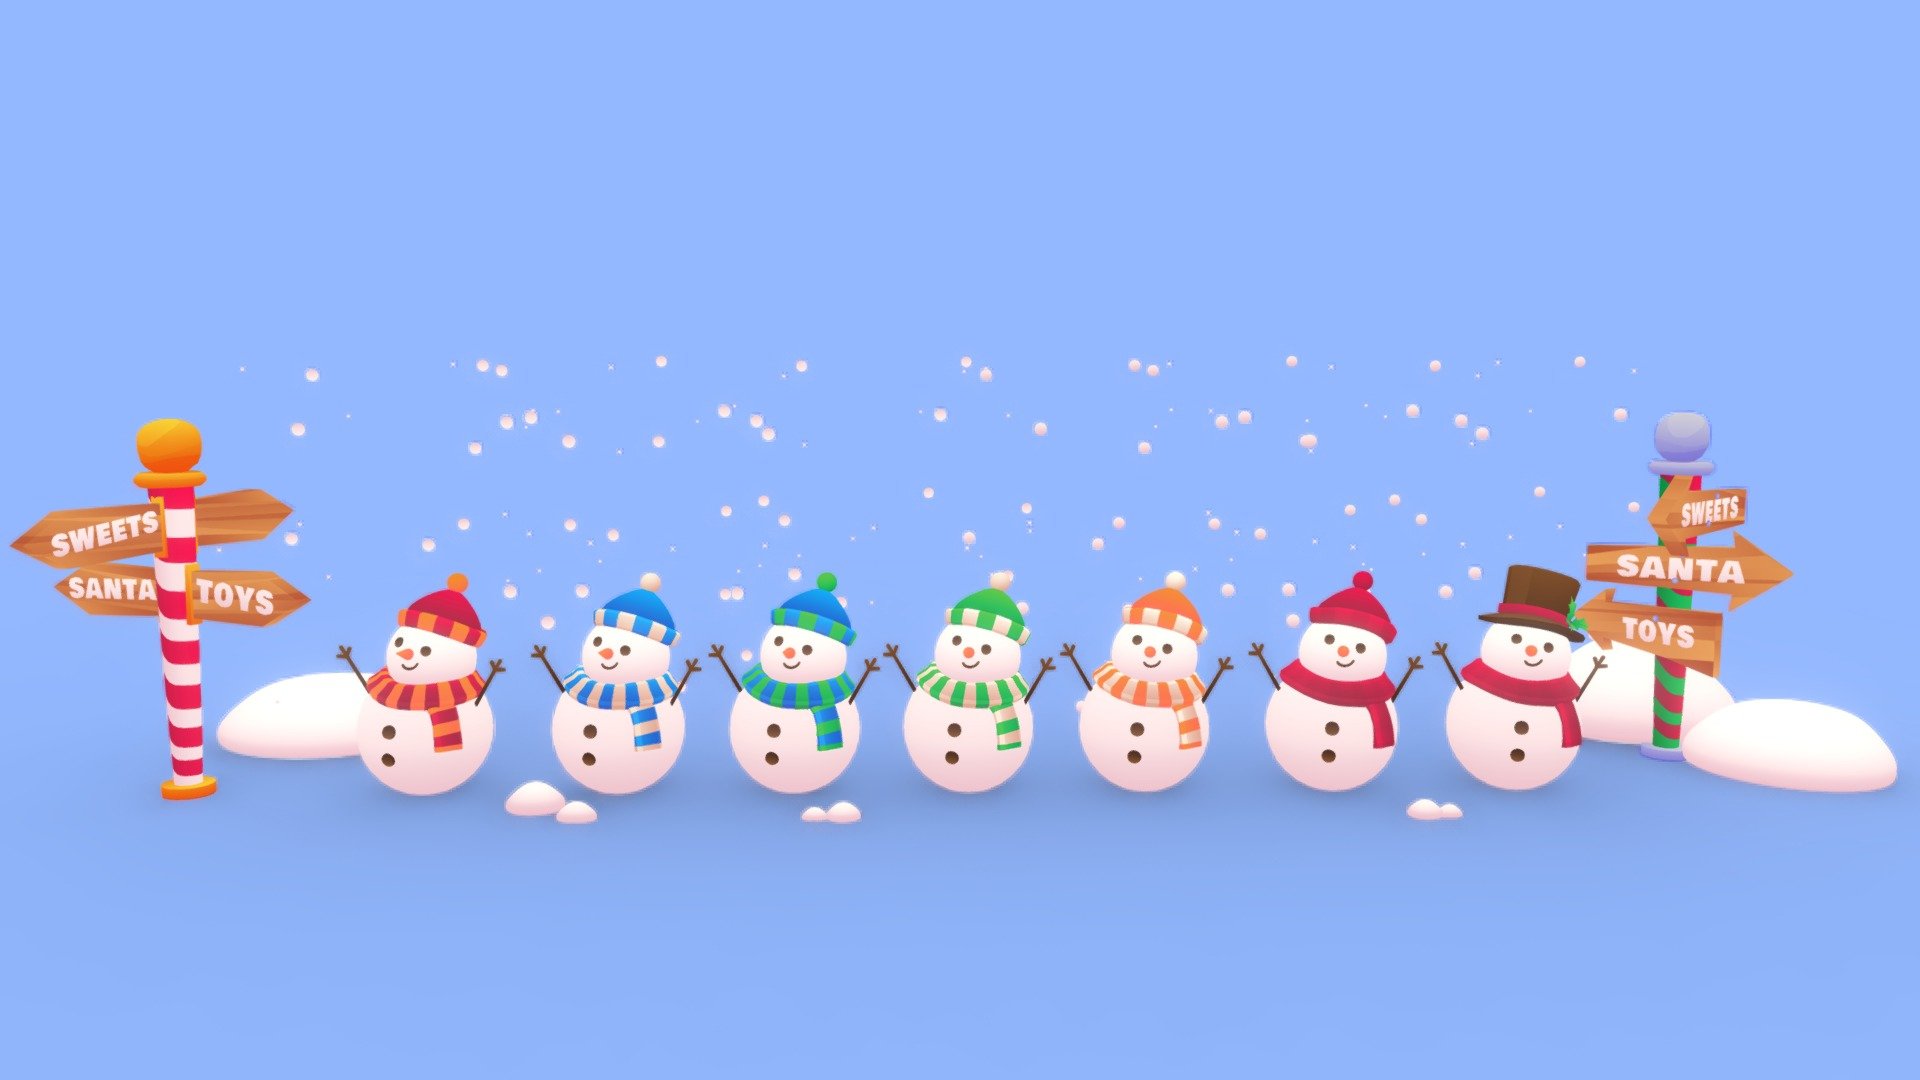 🎅🎄 Happy holidays! 🎄🎅

Spice up your christmas special in your game with this cute cute stylized snowmen and north pole signs christmas pack, use it in your render scenes and games.
Textured with gradient atlas, so it is performant for mobile games and video games.

Like a few of my other assets in the same style, it uses a single texture diffuse map and is mapped using only color gradients. All gradient textures can be extended and combined to a large atlas.

There are more assets in this style to add to your game scene or environment. Check out my sale.

If you want to change the colors of the assets, you just need to move the UVs on the atlas to a different gradient. Or contact me for changes, for a small fee.

-------------Terms of Use--------------

Commercial use of the assets provided is permitted but cannot be included in an asset pack or sold at any sort of asset/resource marketplace. or shared for free - cute stylized snowmen and north pole signs - Buy Royalty Free 3D model by Stylized Box (@Stylized_Box) 3d model